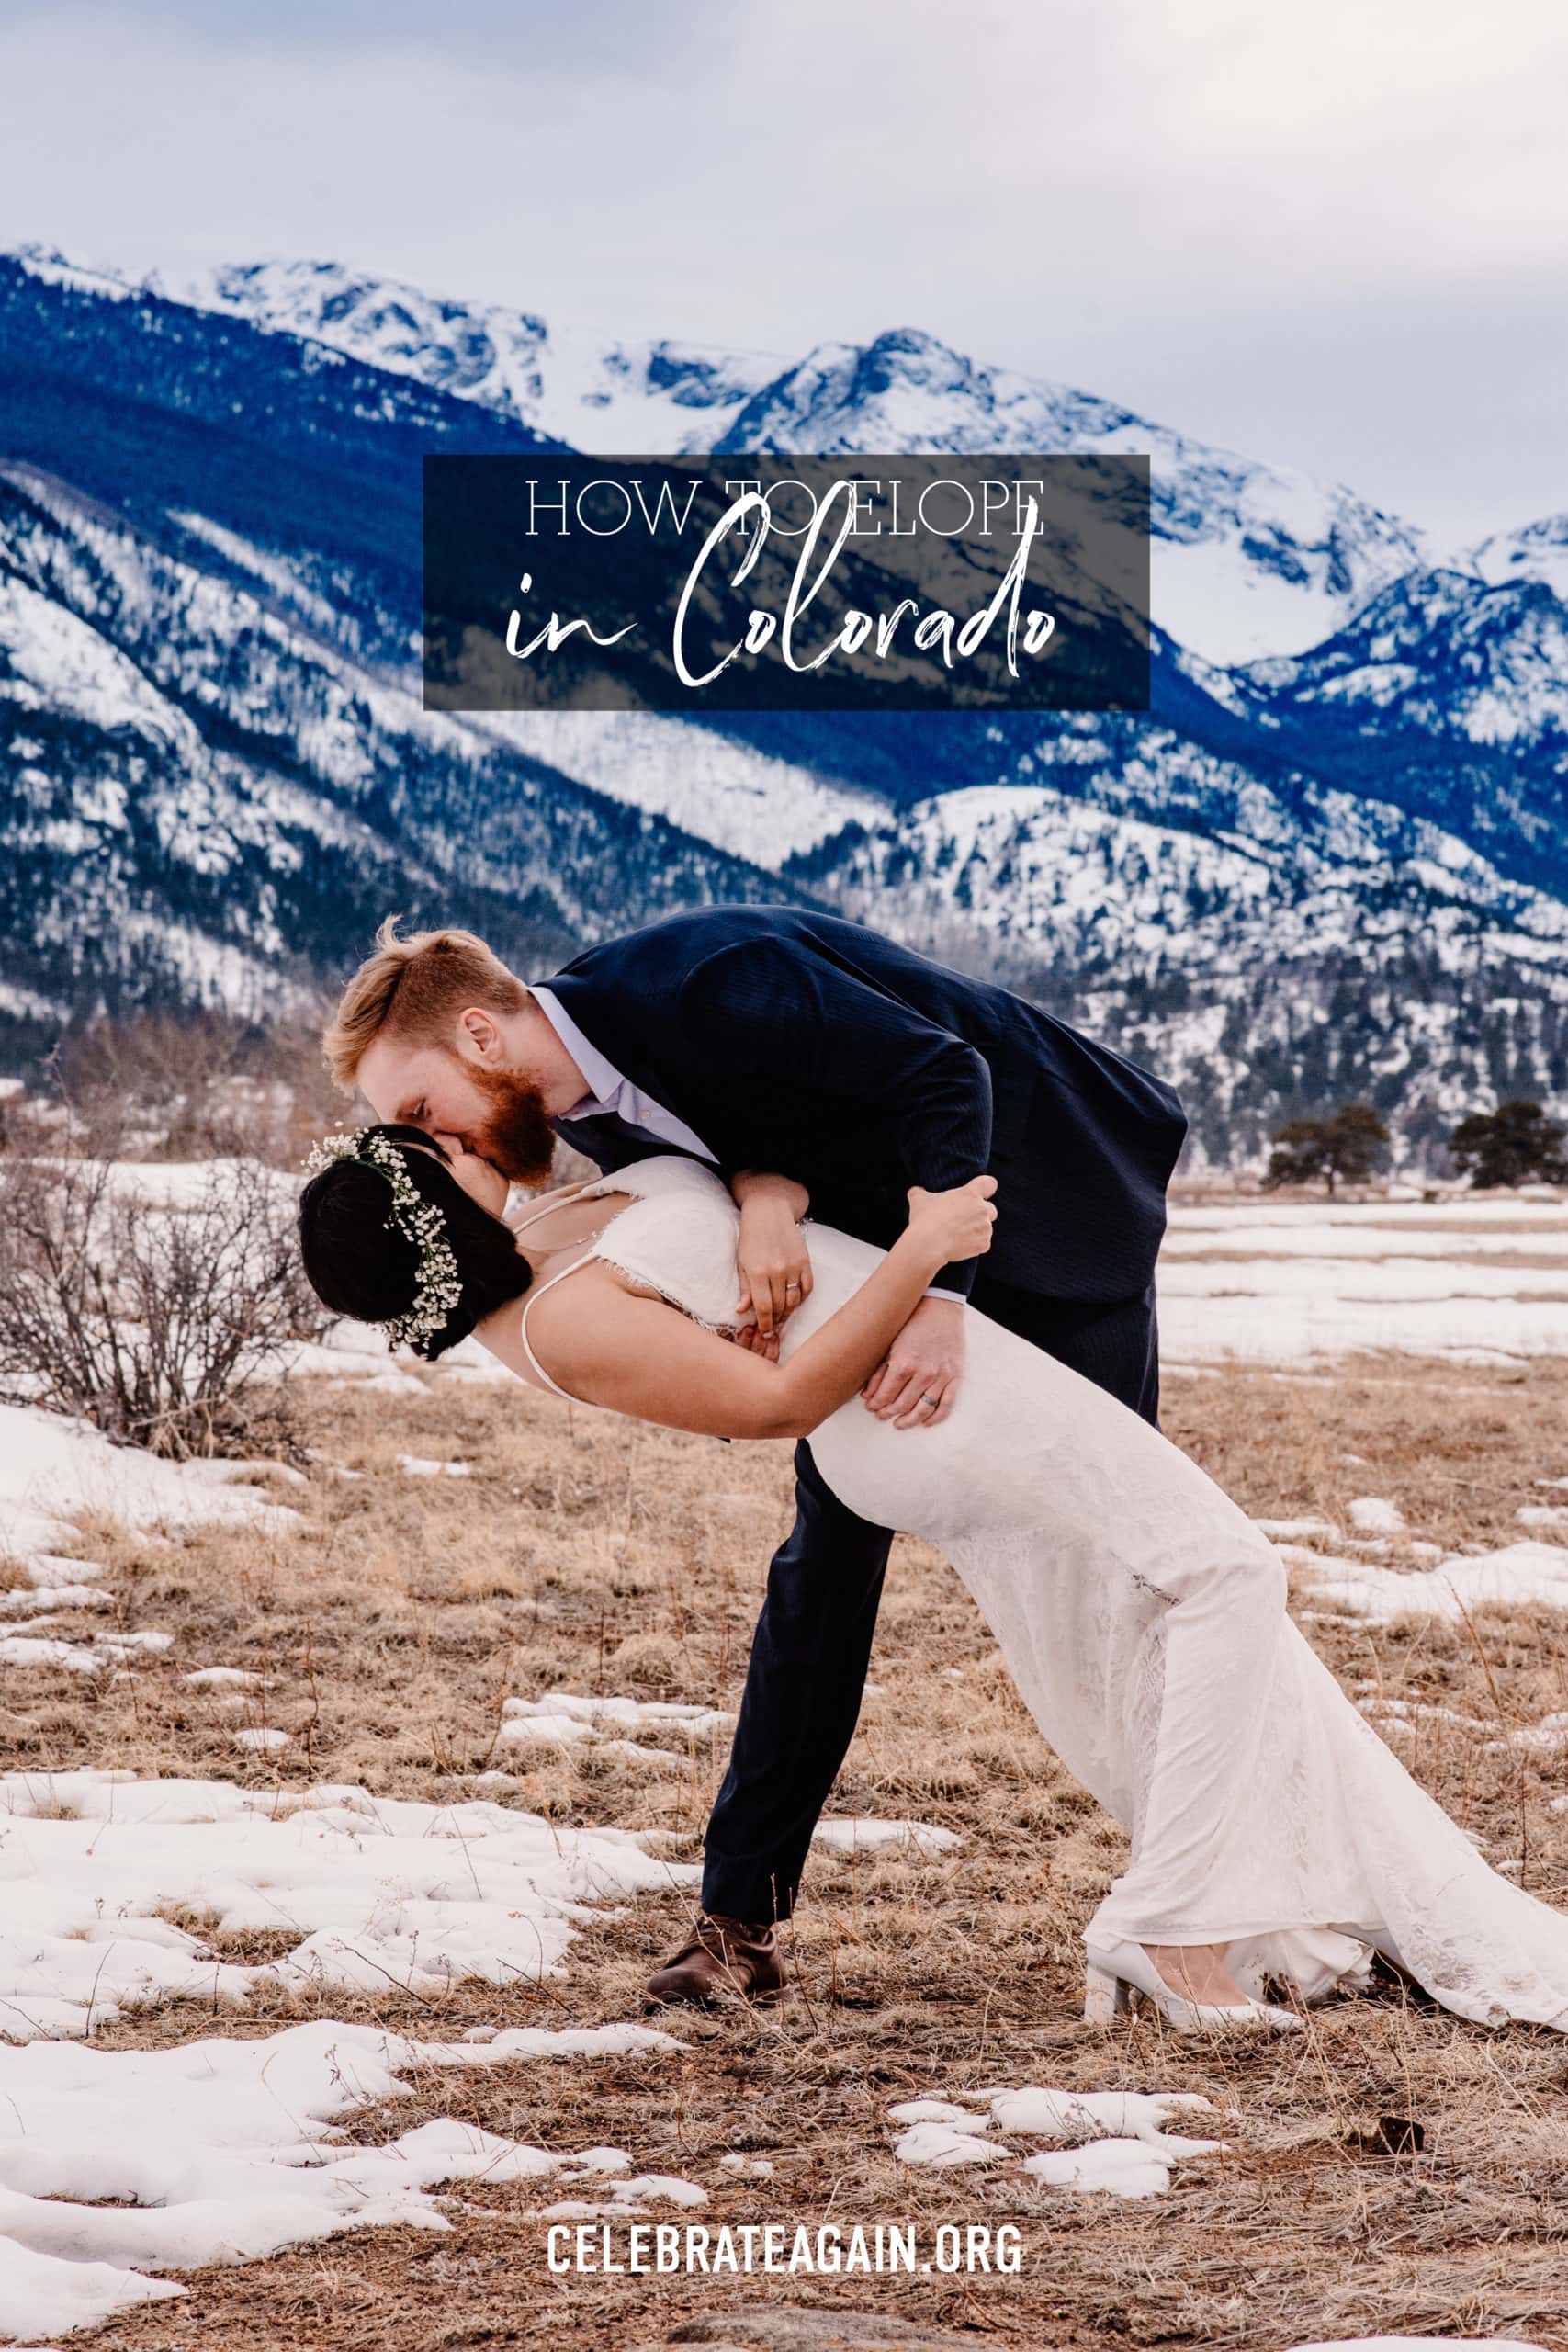 "how to elope in colorado" text and couple kissing and dipping in front of mountains